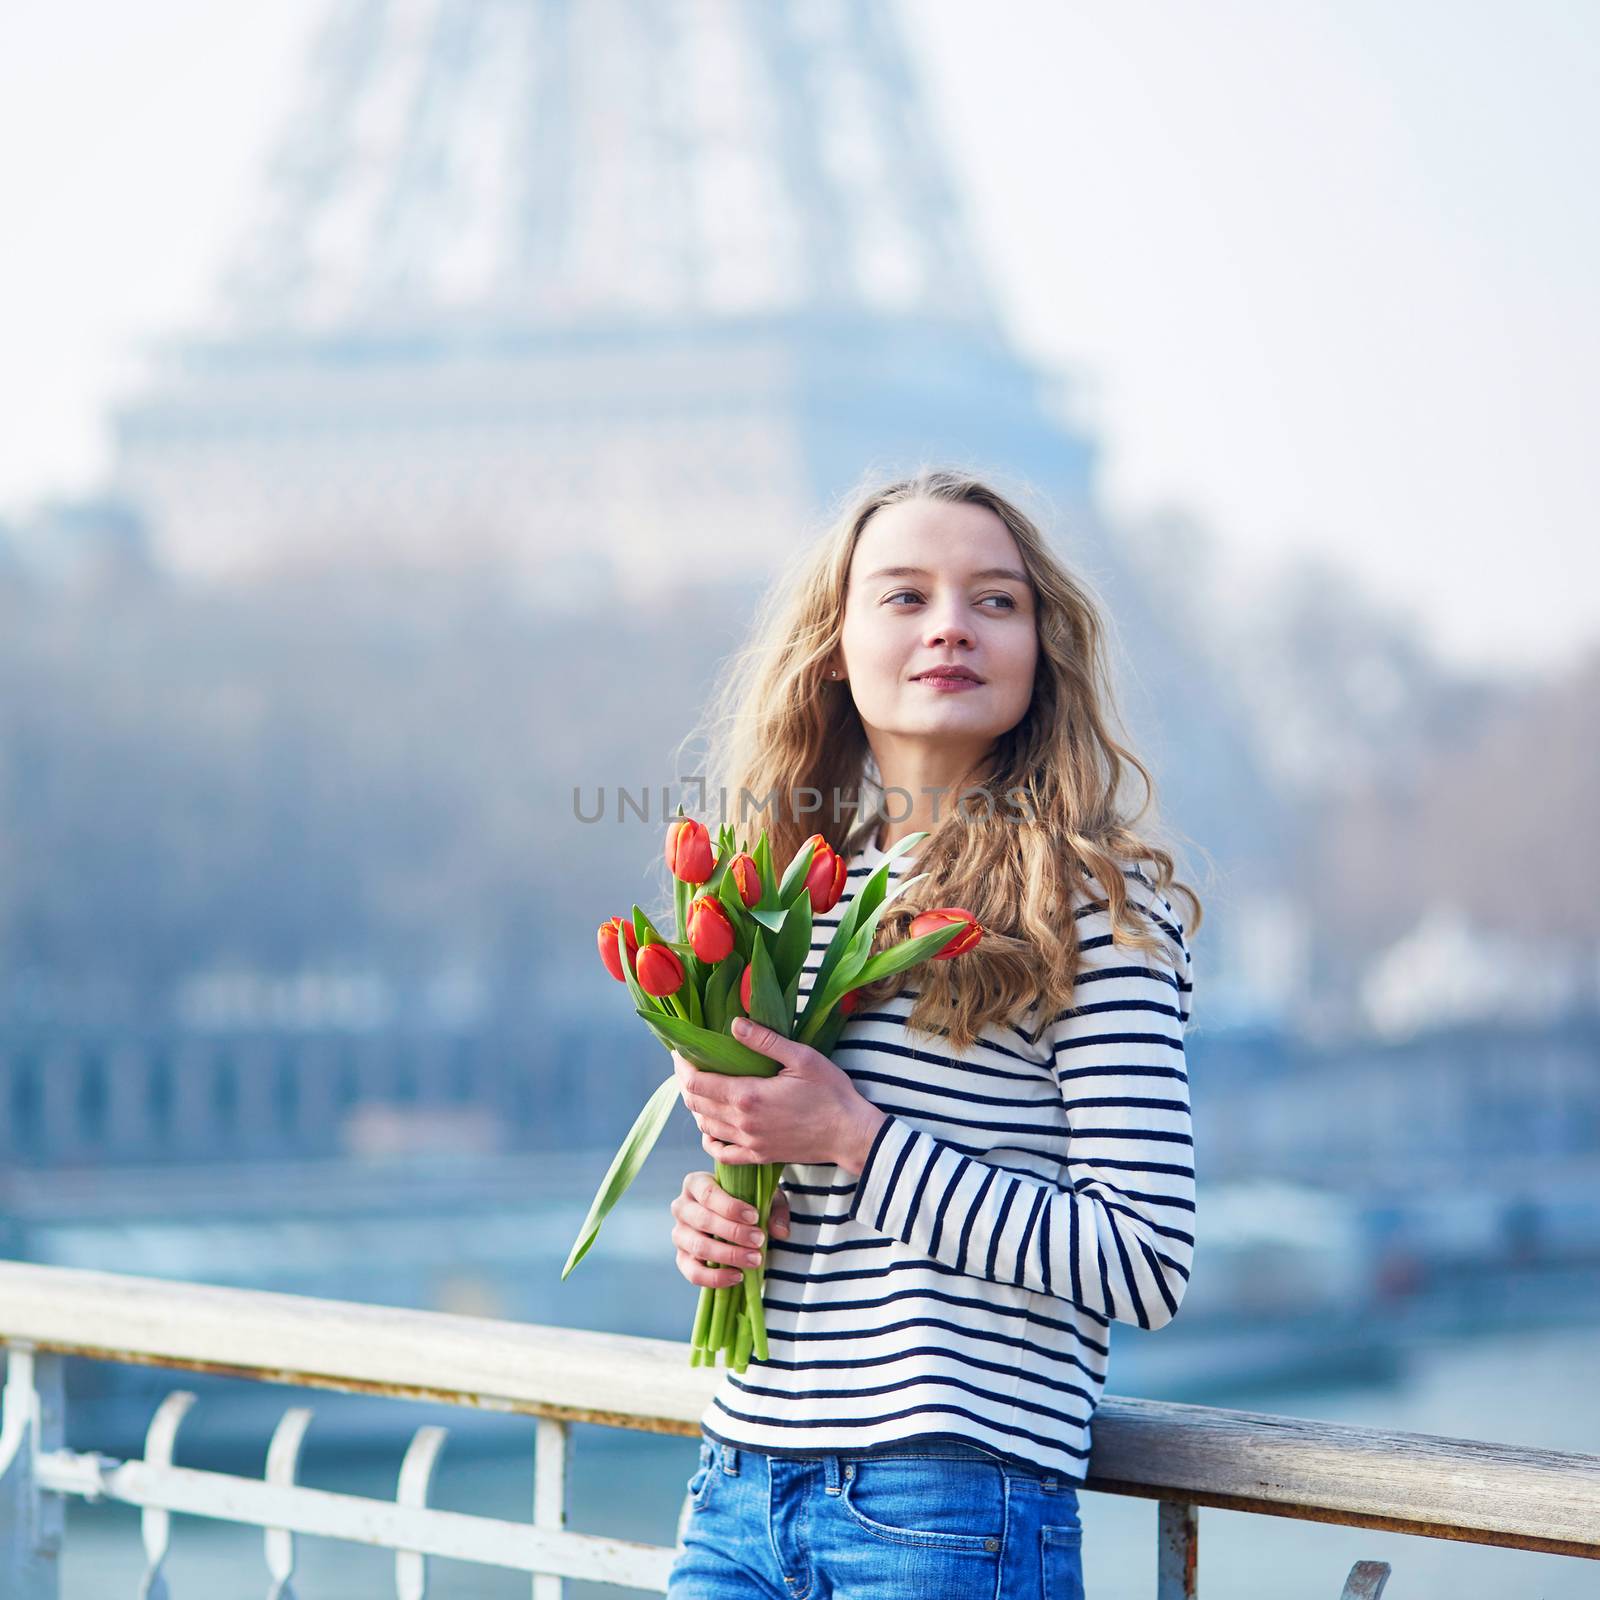 Girl with bunch of red tulips near the Eiffel tower by jaspe